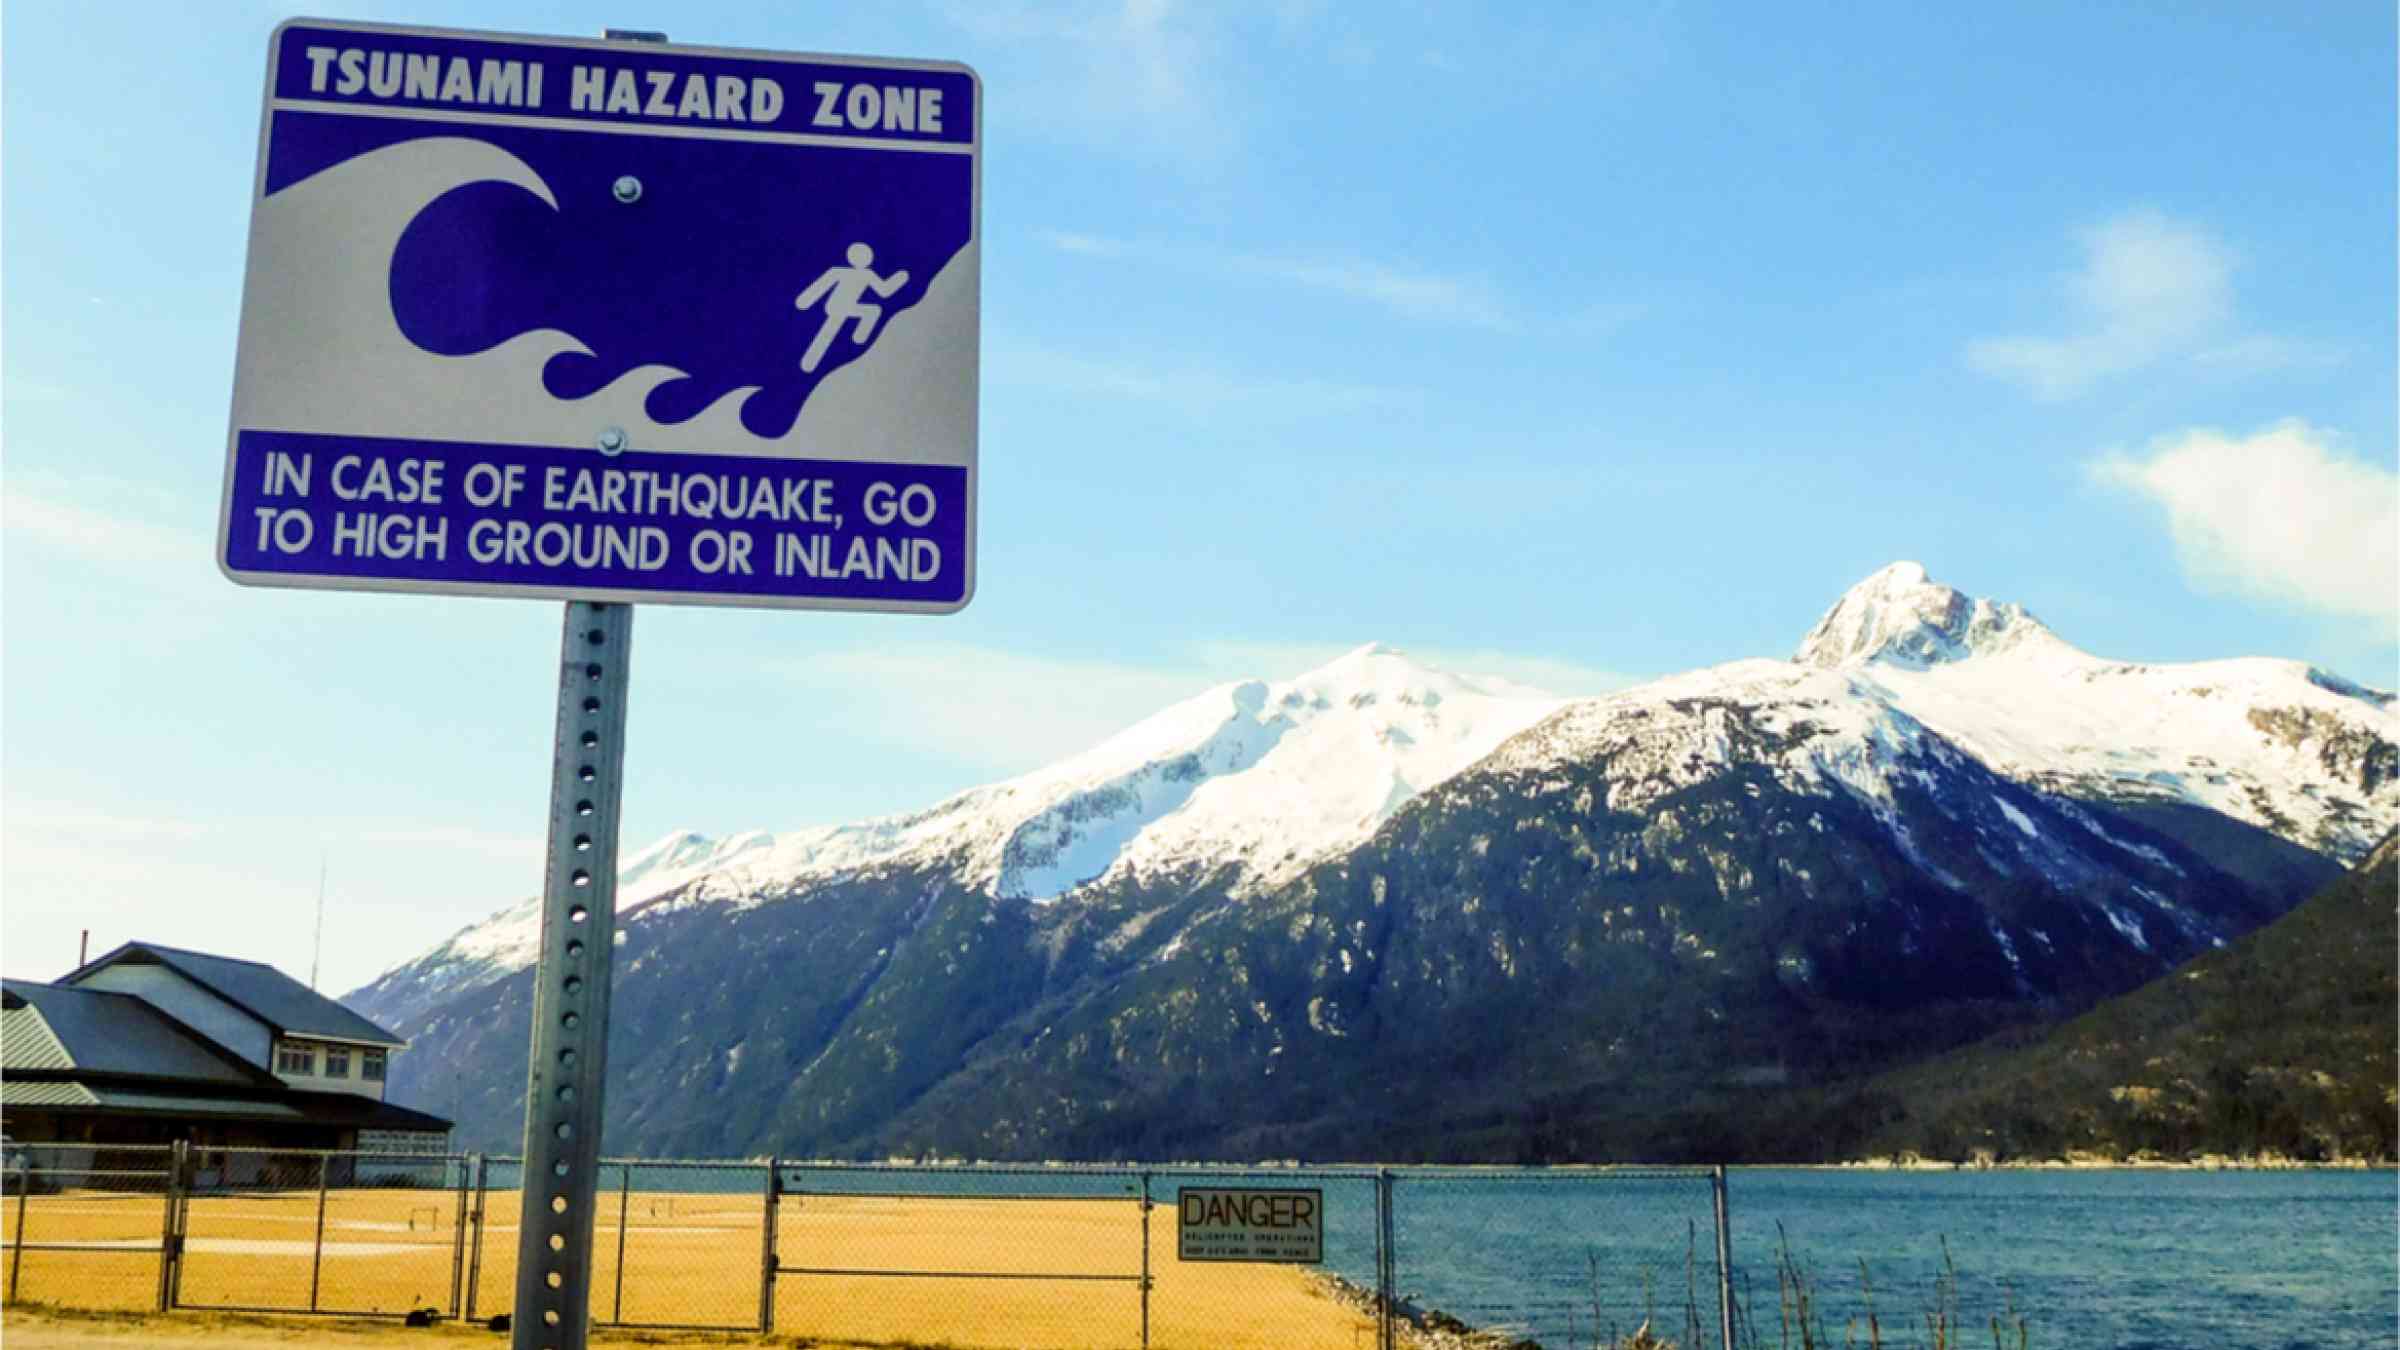 A sign warns of tsunami danger zone in front of coastal mountain region.